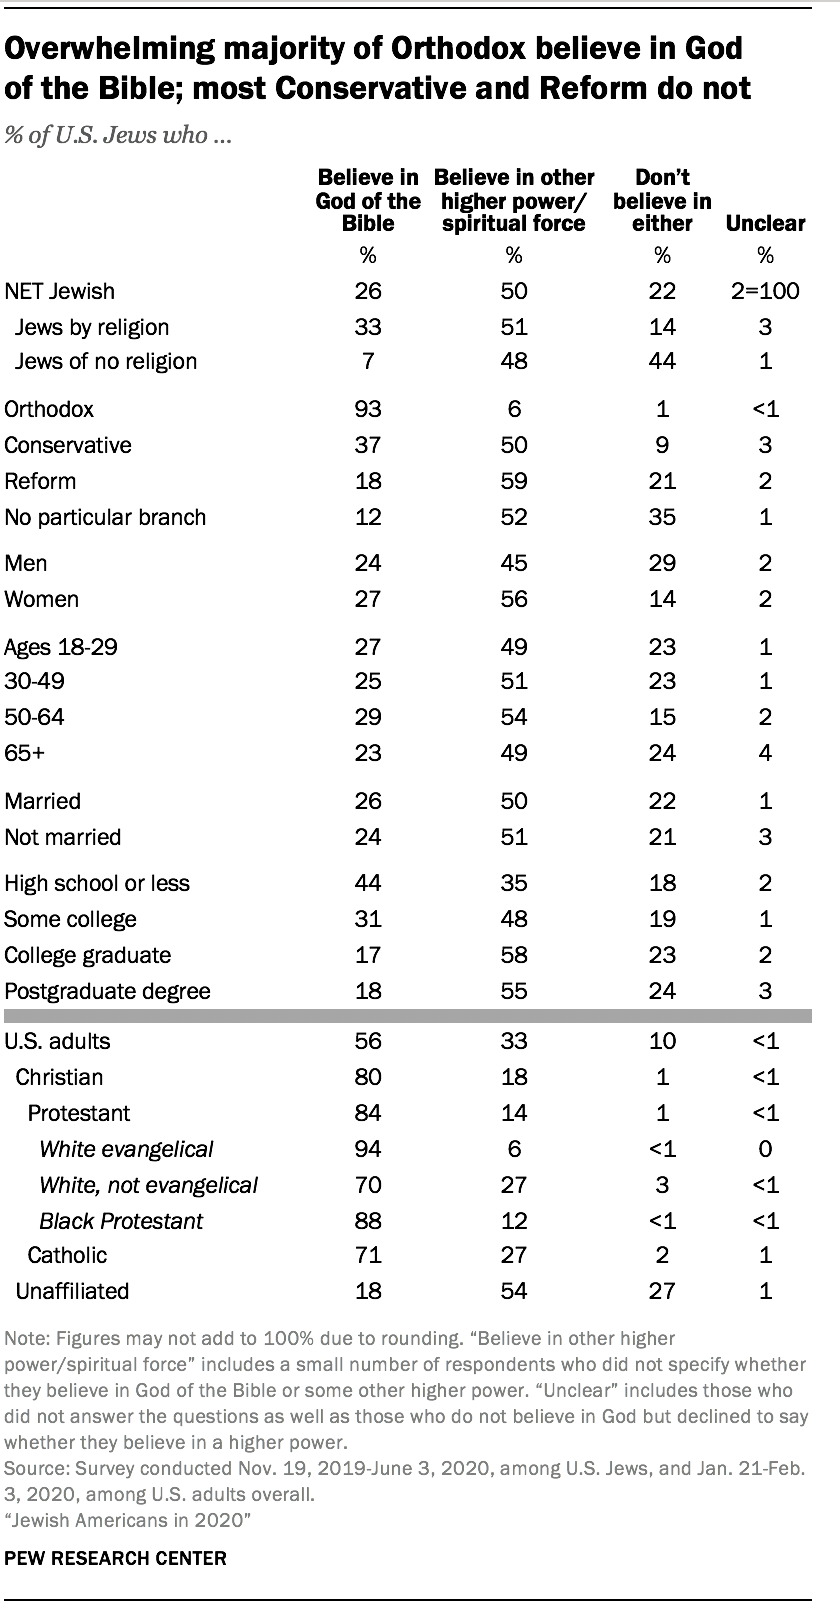 Overwhelming majority of Orthodox believe in God of the Bible; most Conservative and Reform do not